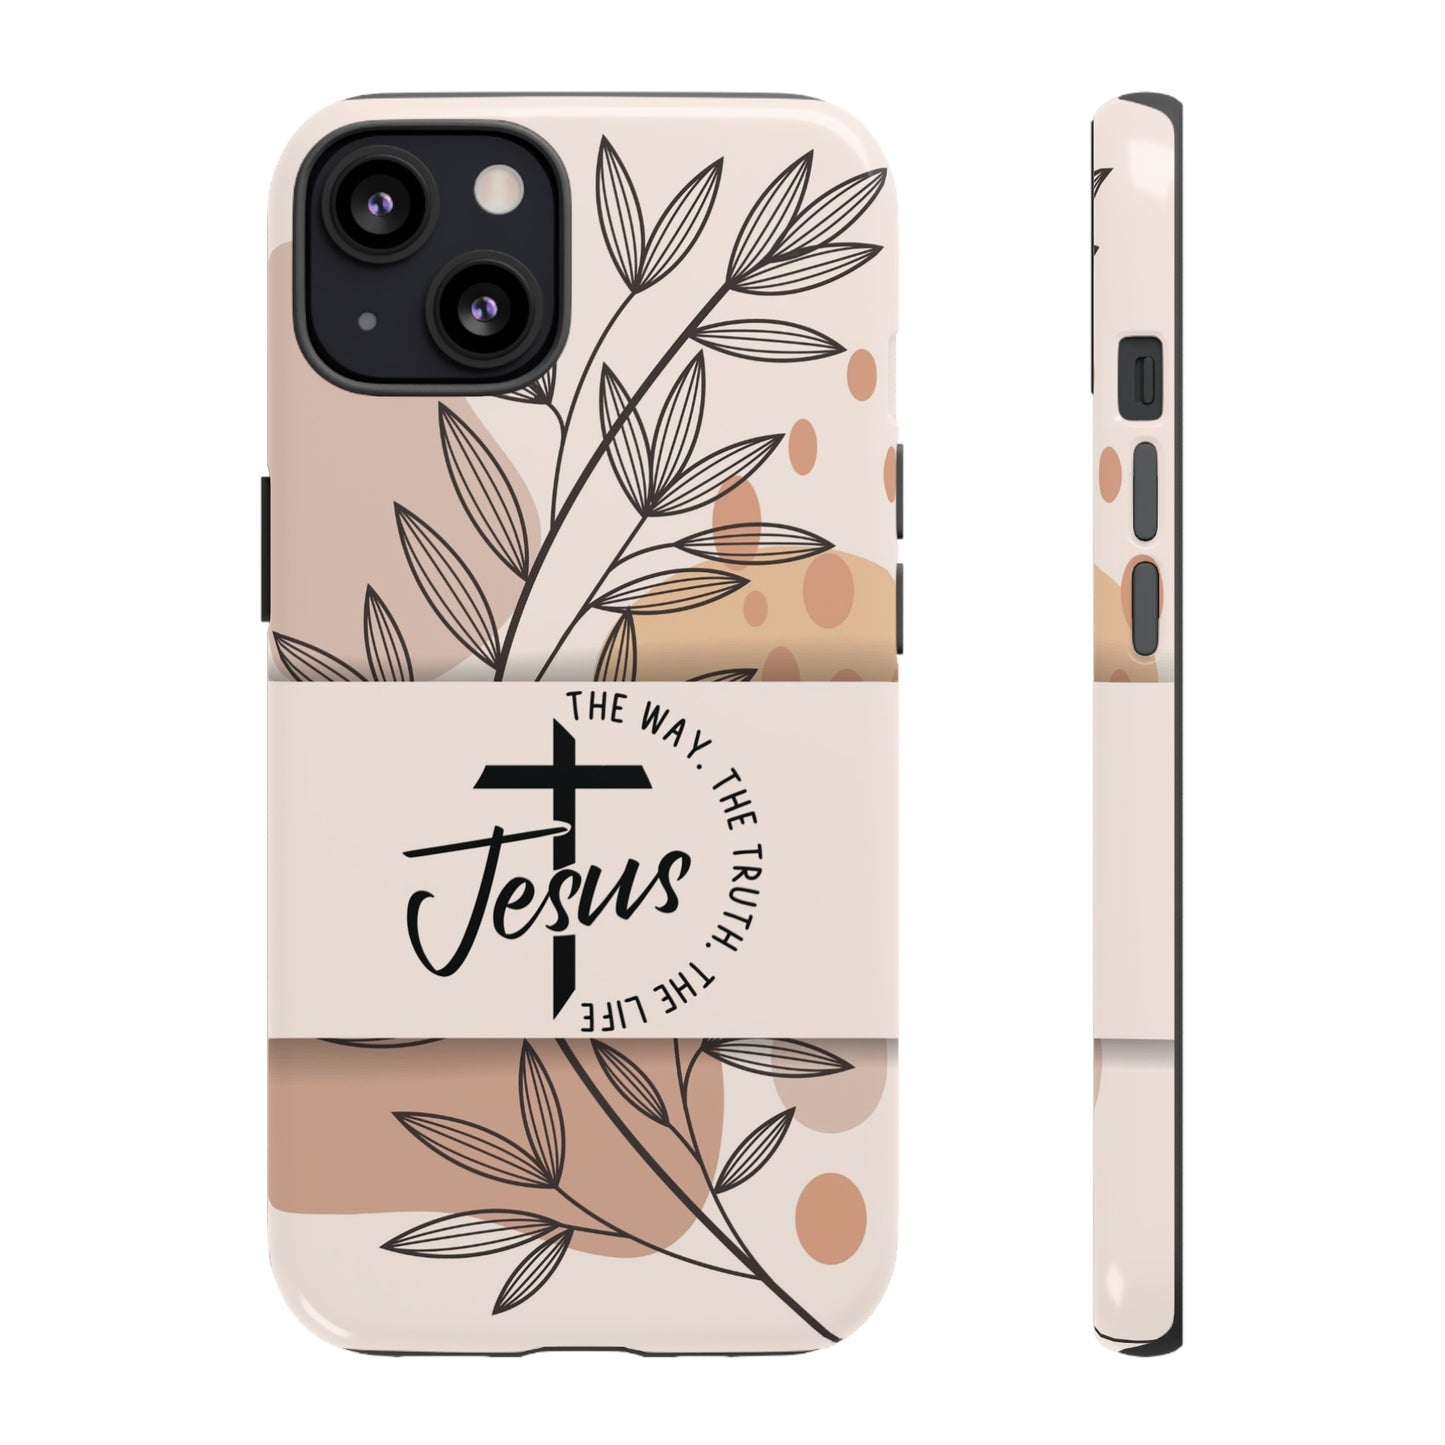 Jesus, The Way The Truth The Life iPhone Protective Cases=